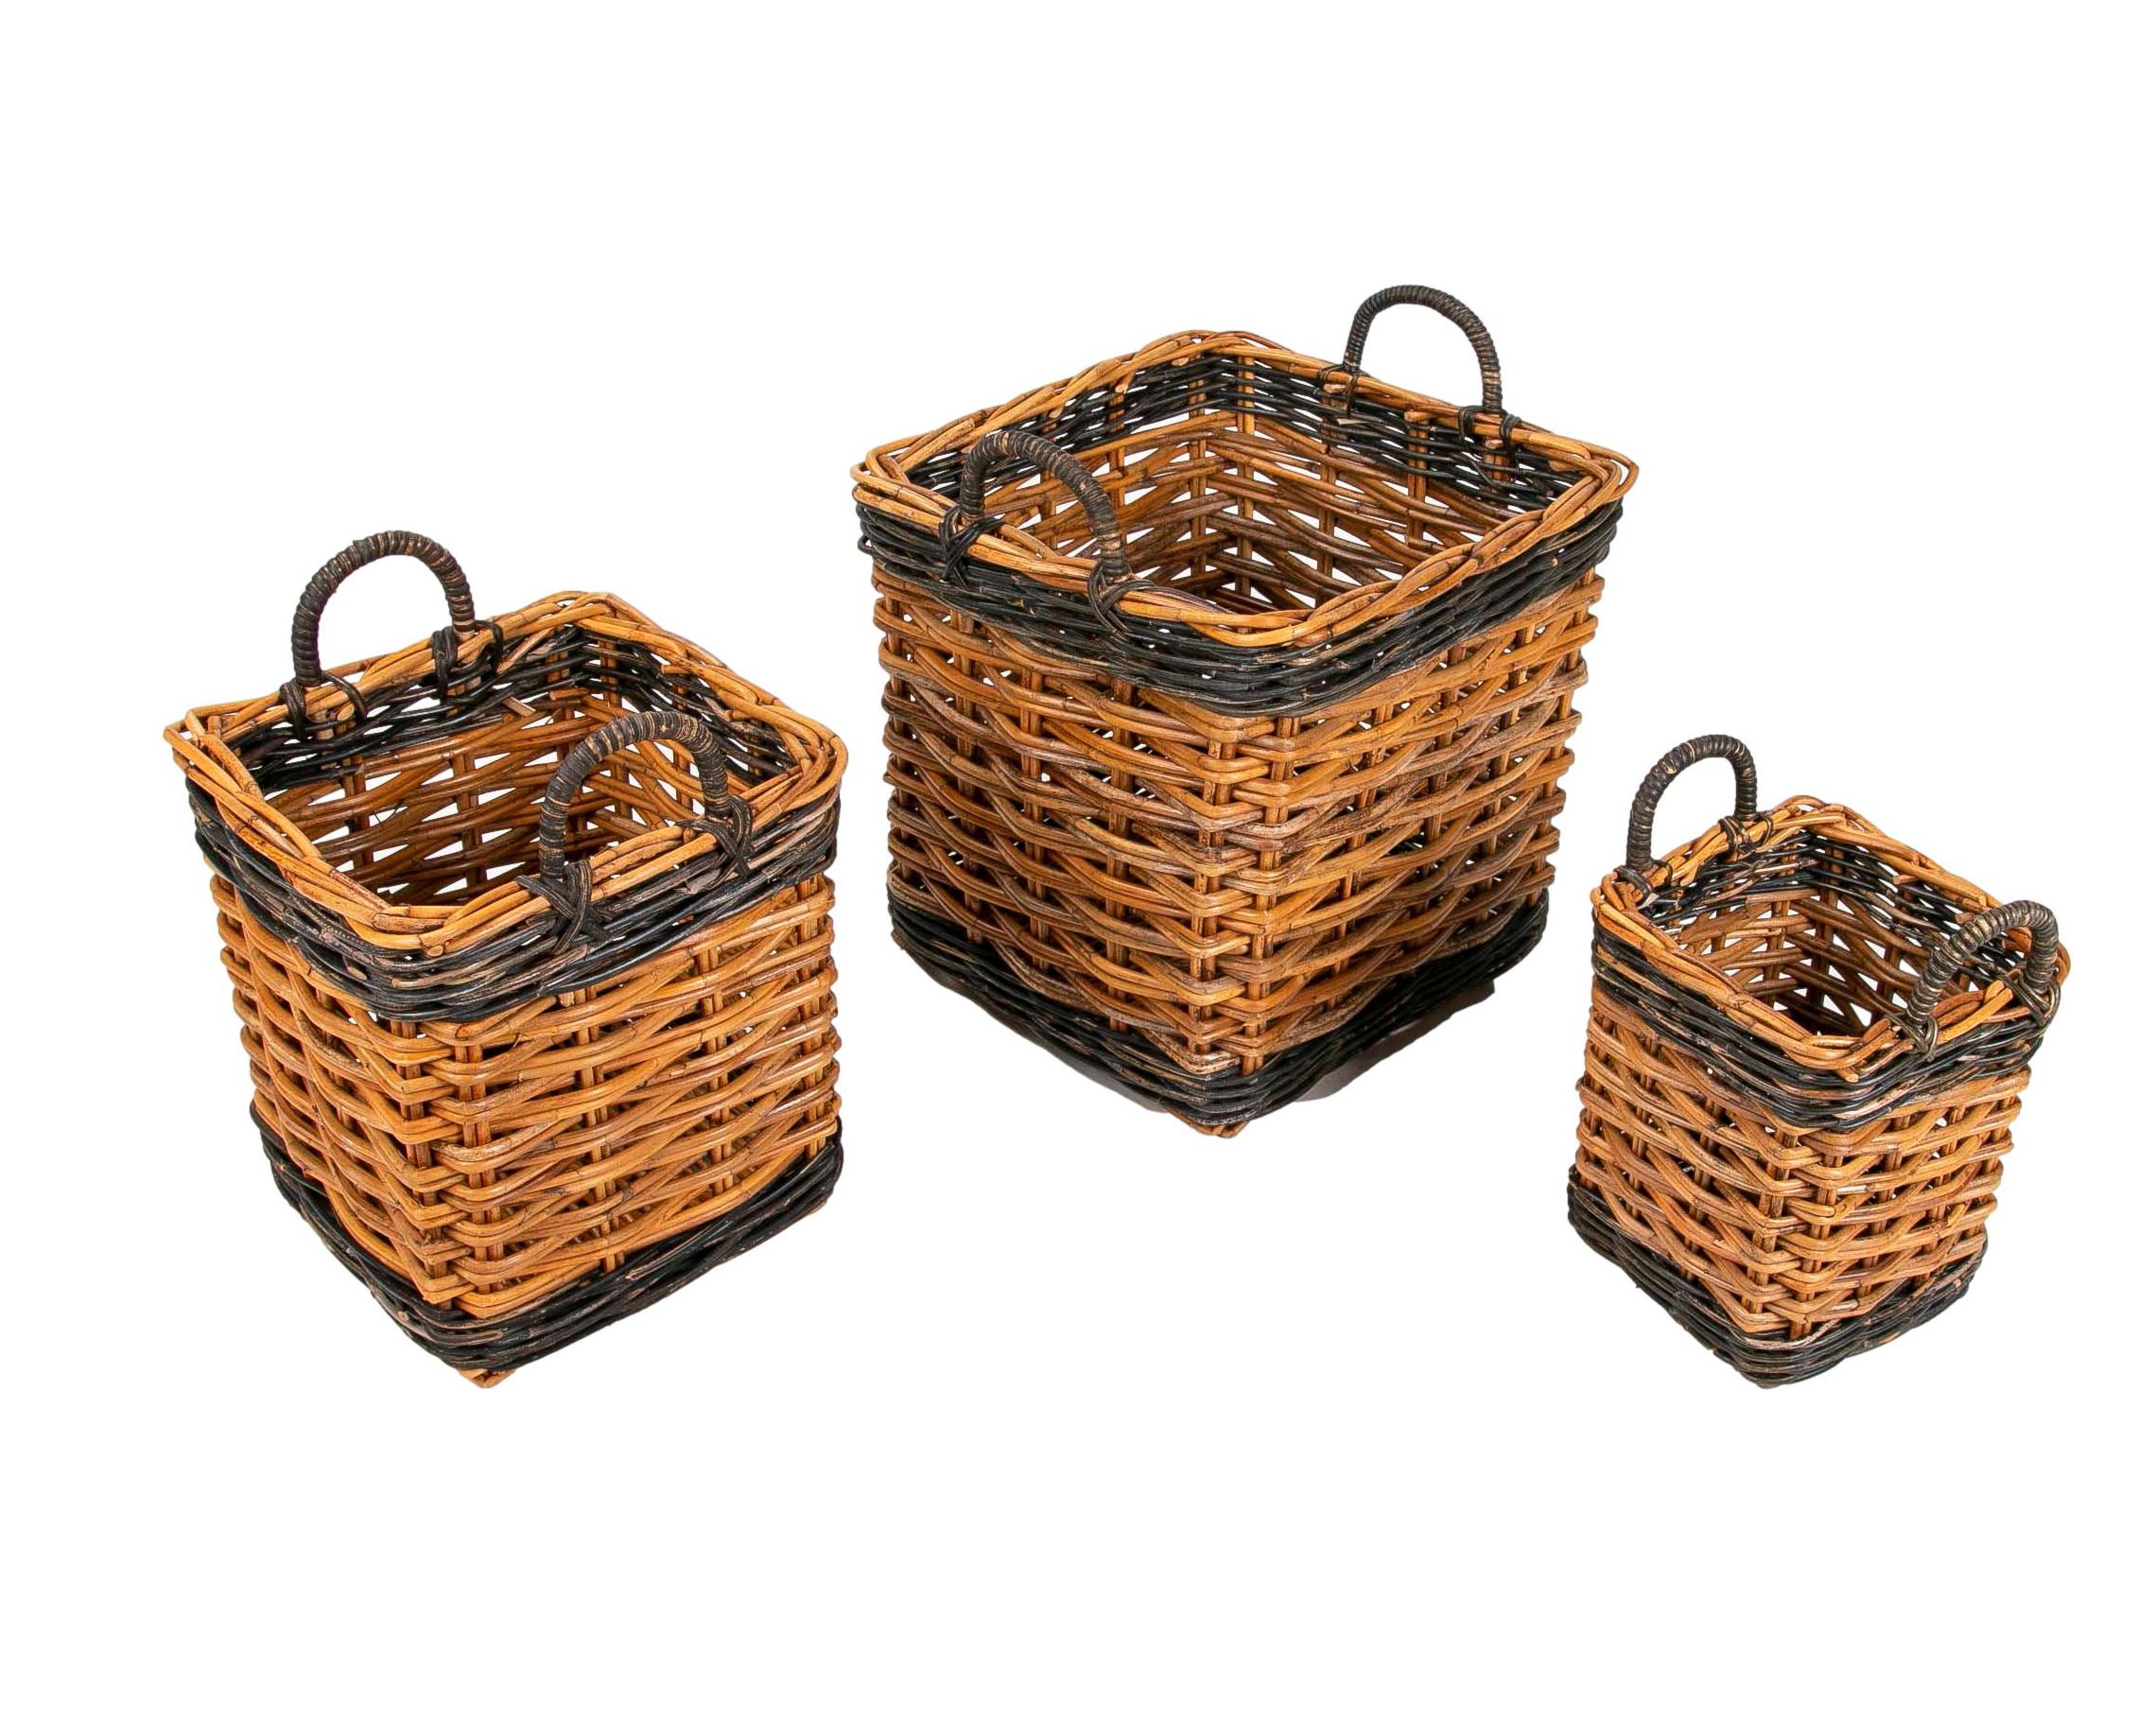 Set Consisting of Three Handmade Wicker Baskets

Dimensions are of the largest item
